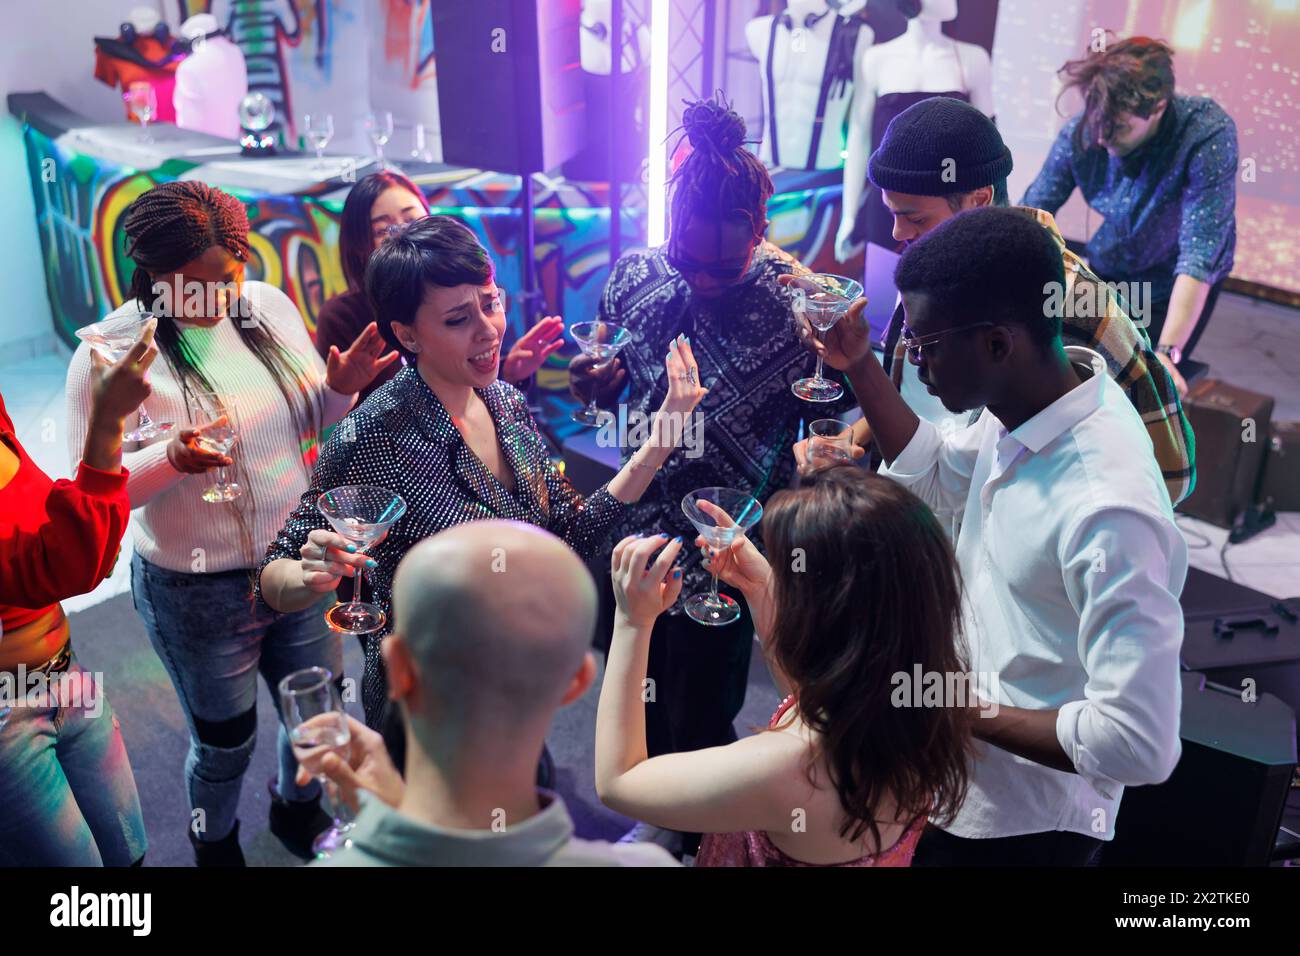 Friends drinking alcohol while dancing and singing at nightclub party. Carefree young people enjoying beverages, holding glasses and saying toast while clubbing on dancefloor Stock Photo